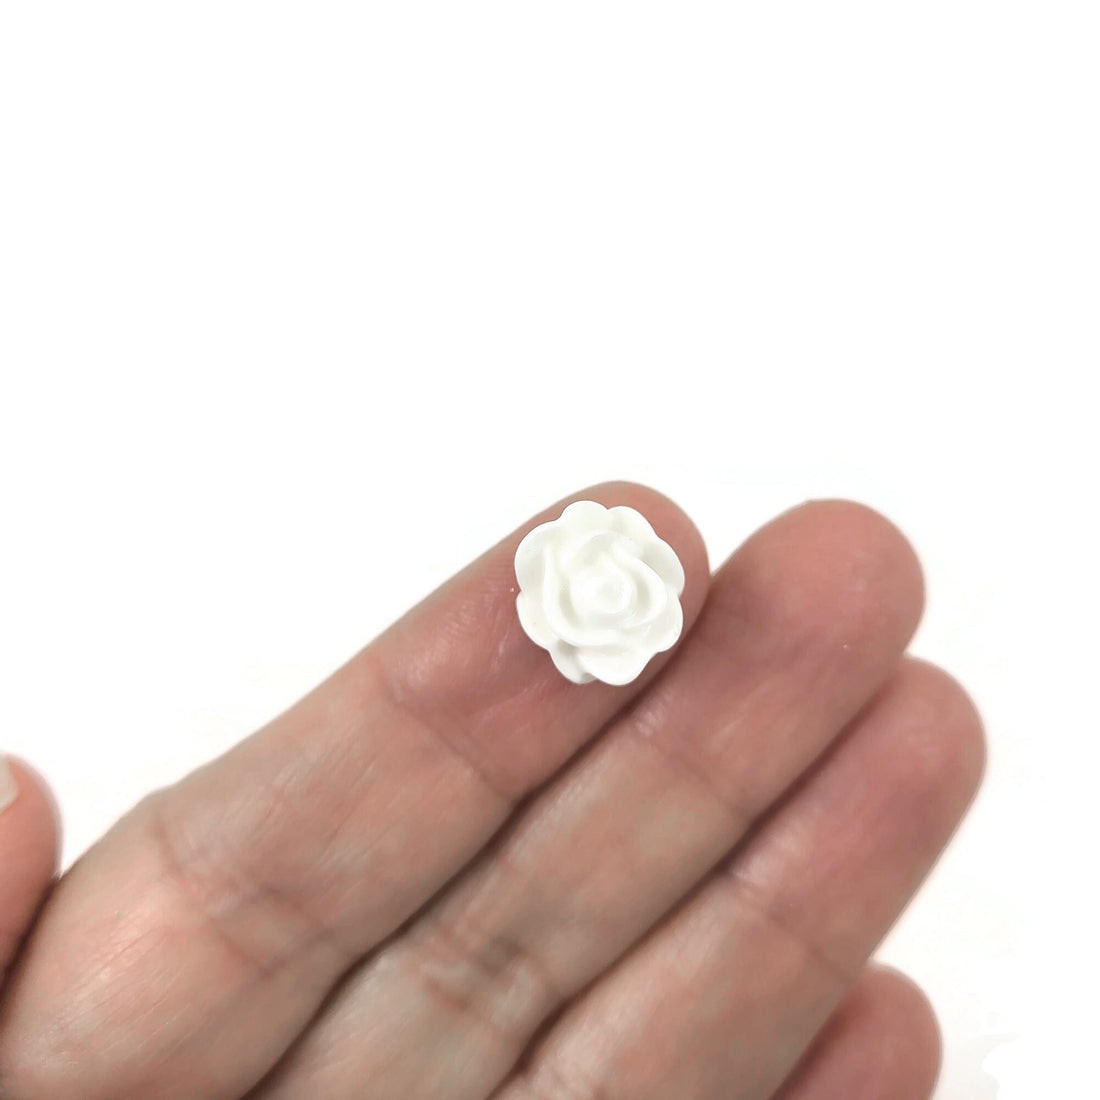 White flower cabochons, 12mm resin rose embellishments, Flatback earring cabochons, Jewelry making supplies